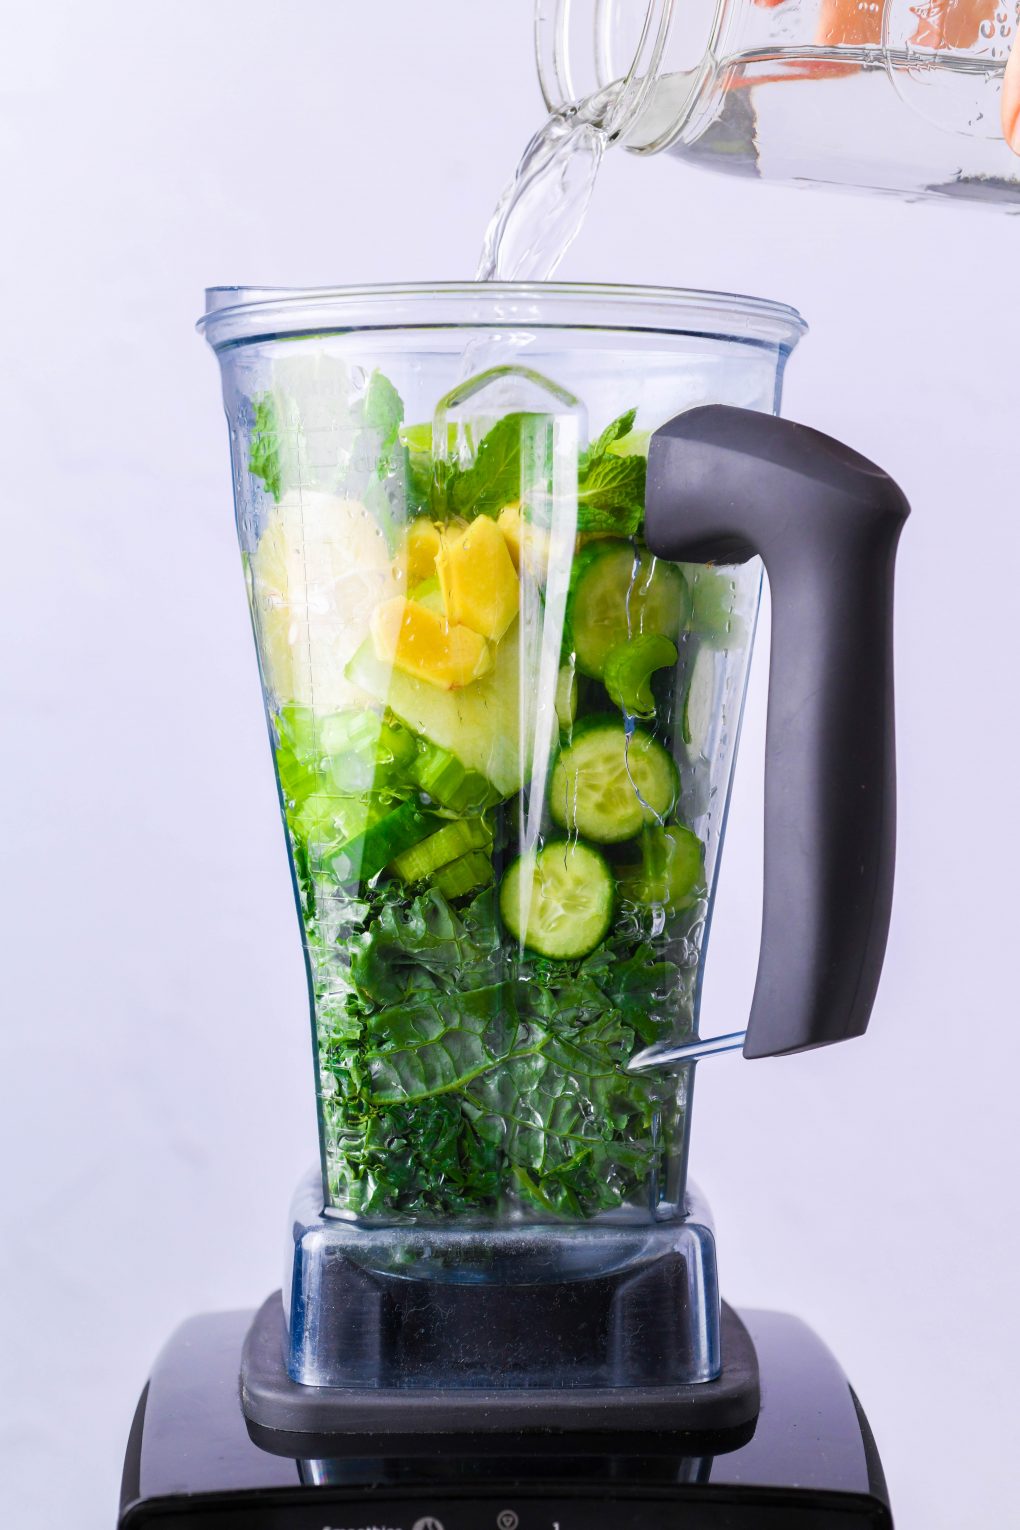 Straight on shot of a blender container filled with all the ingredients for green juice